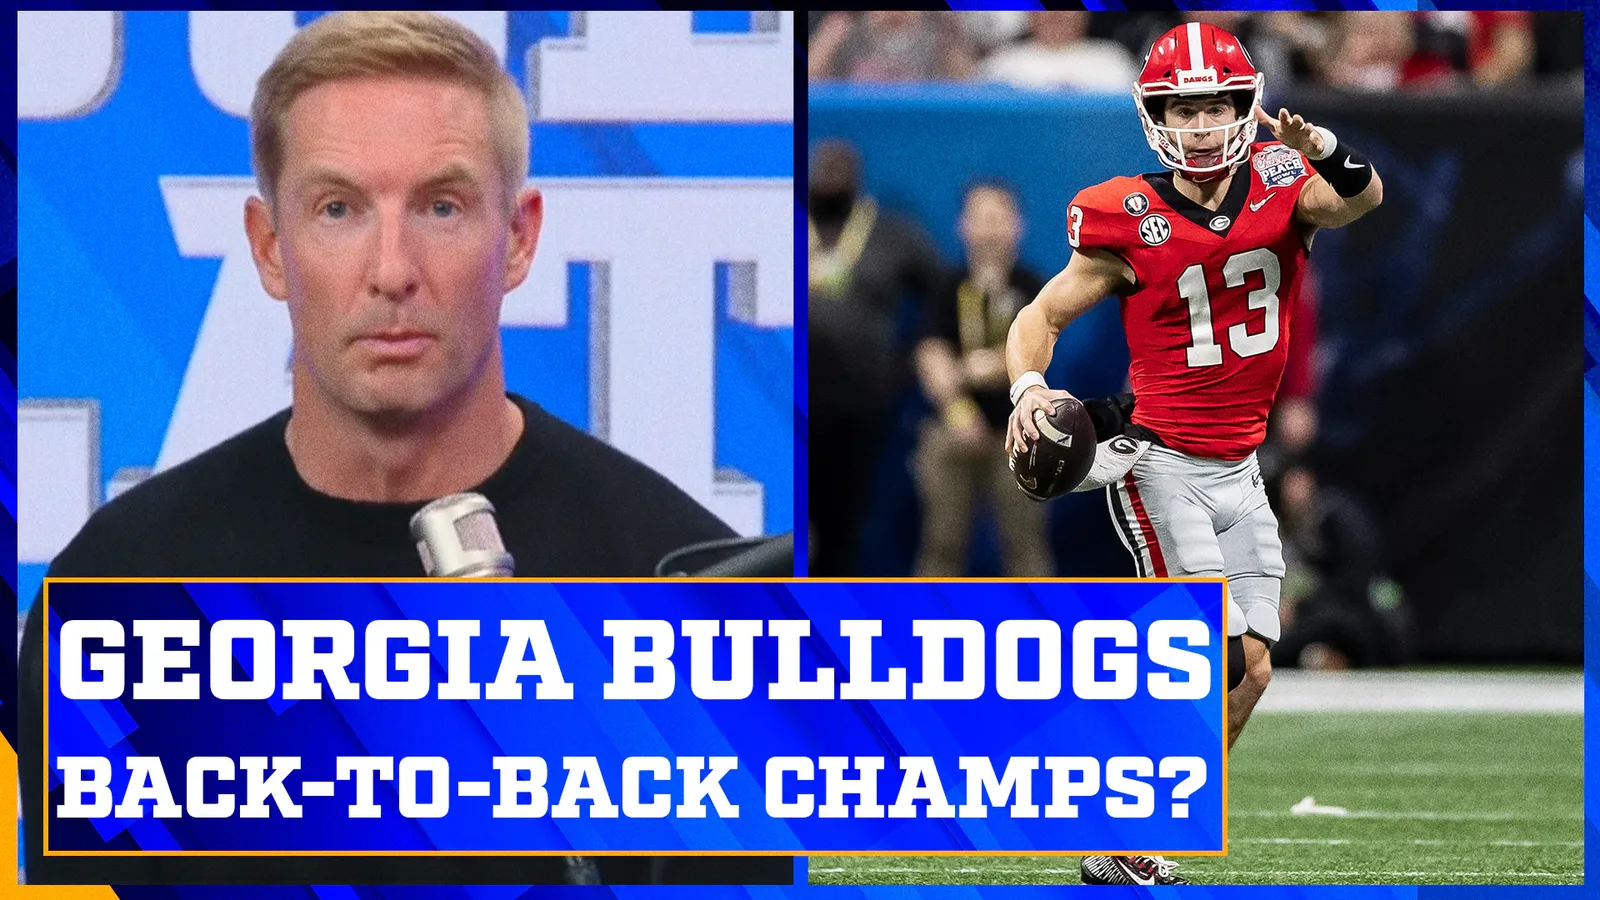 Can Georgia win back-to-back championships?